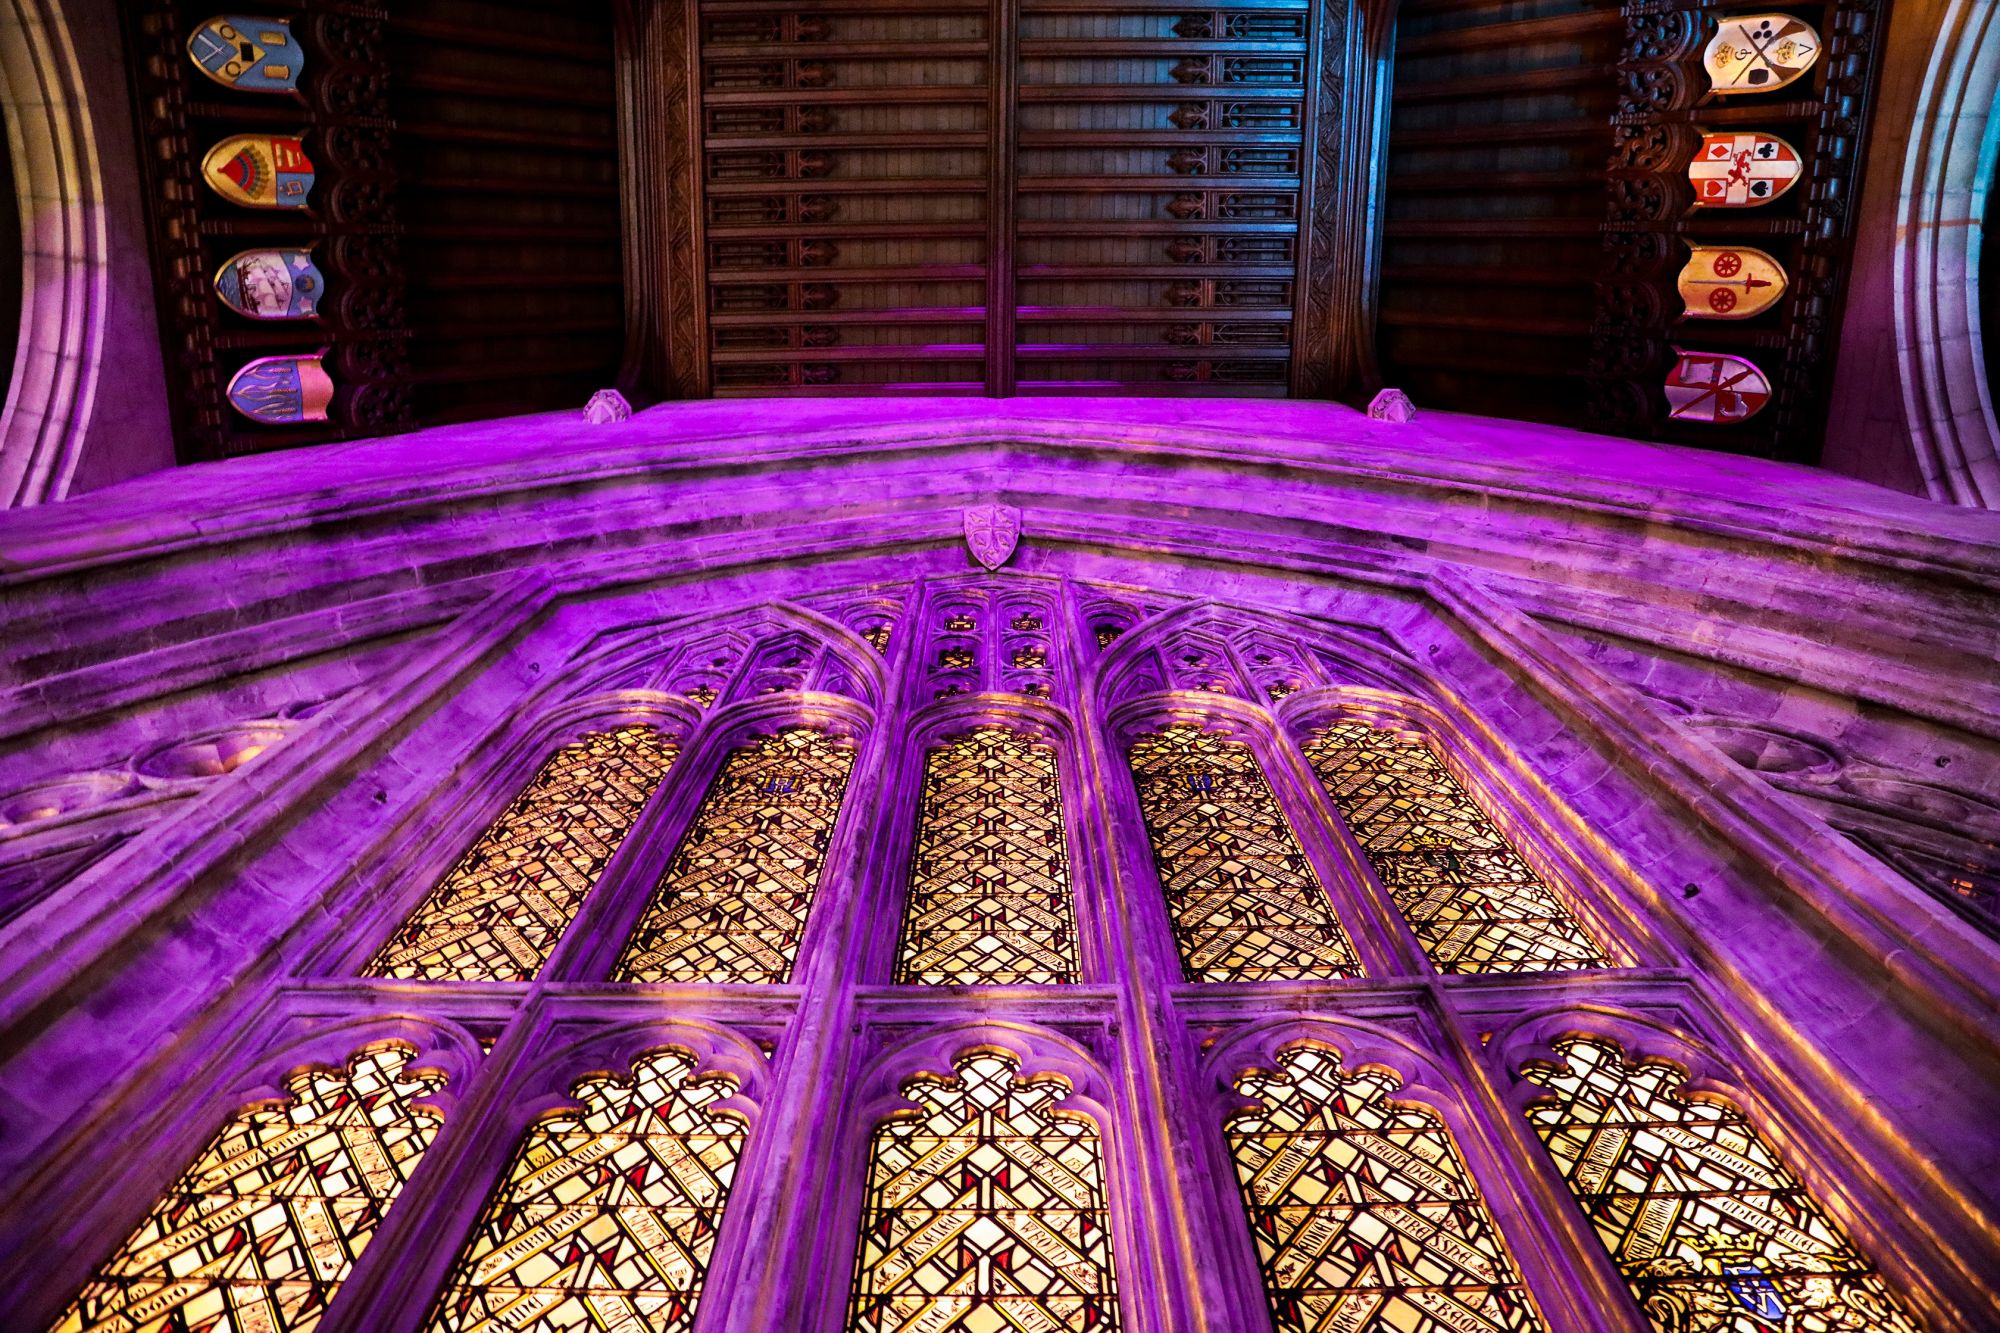 Looking up at the stainglass windows inside the great hall with purple lighing